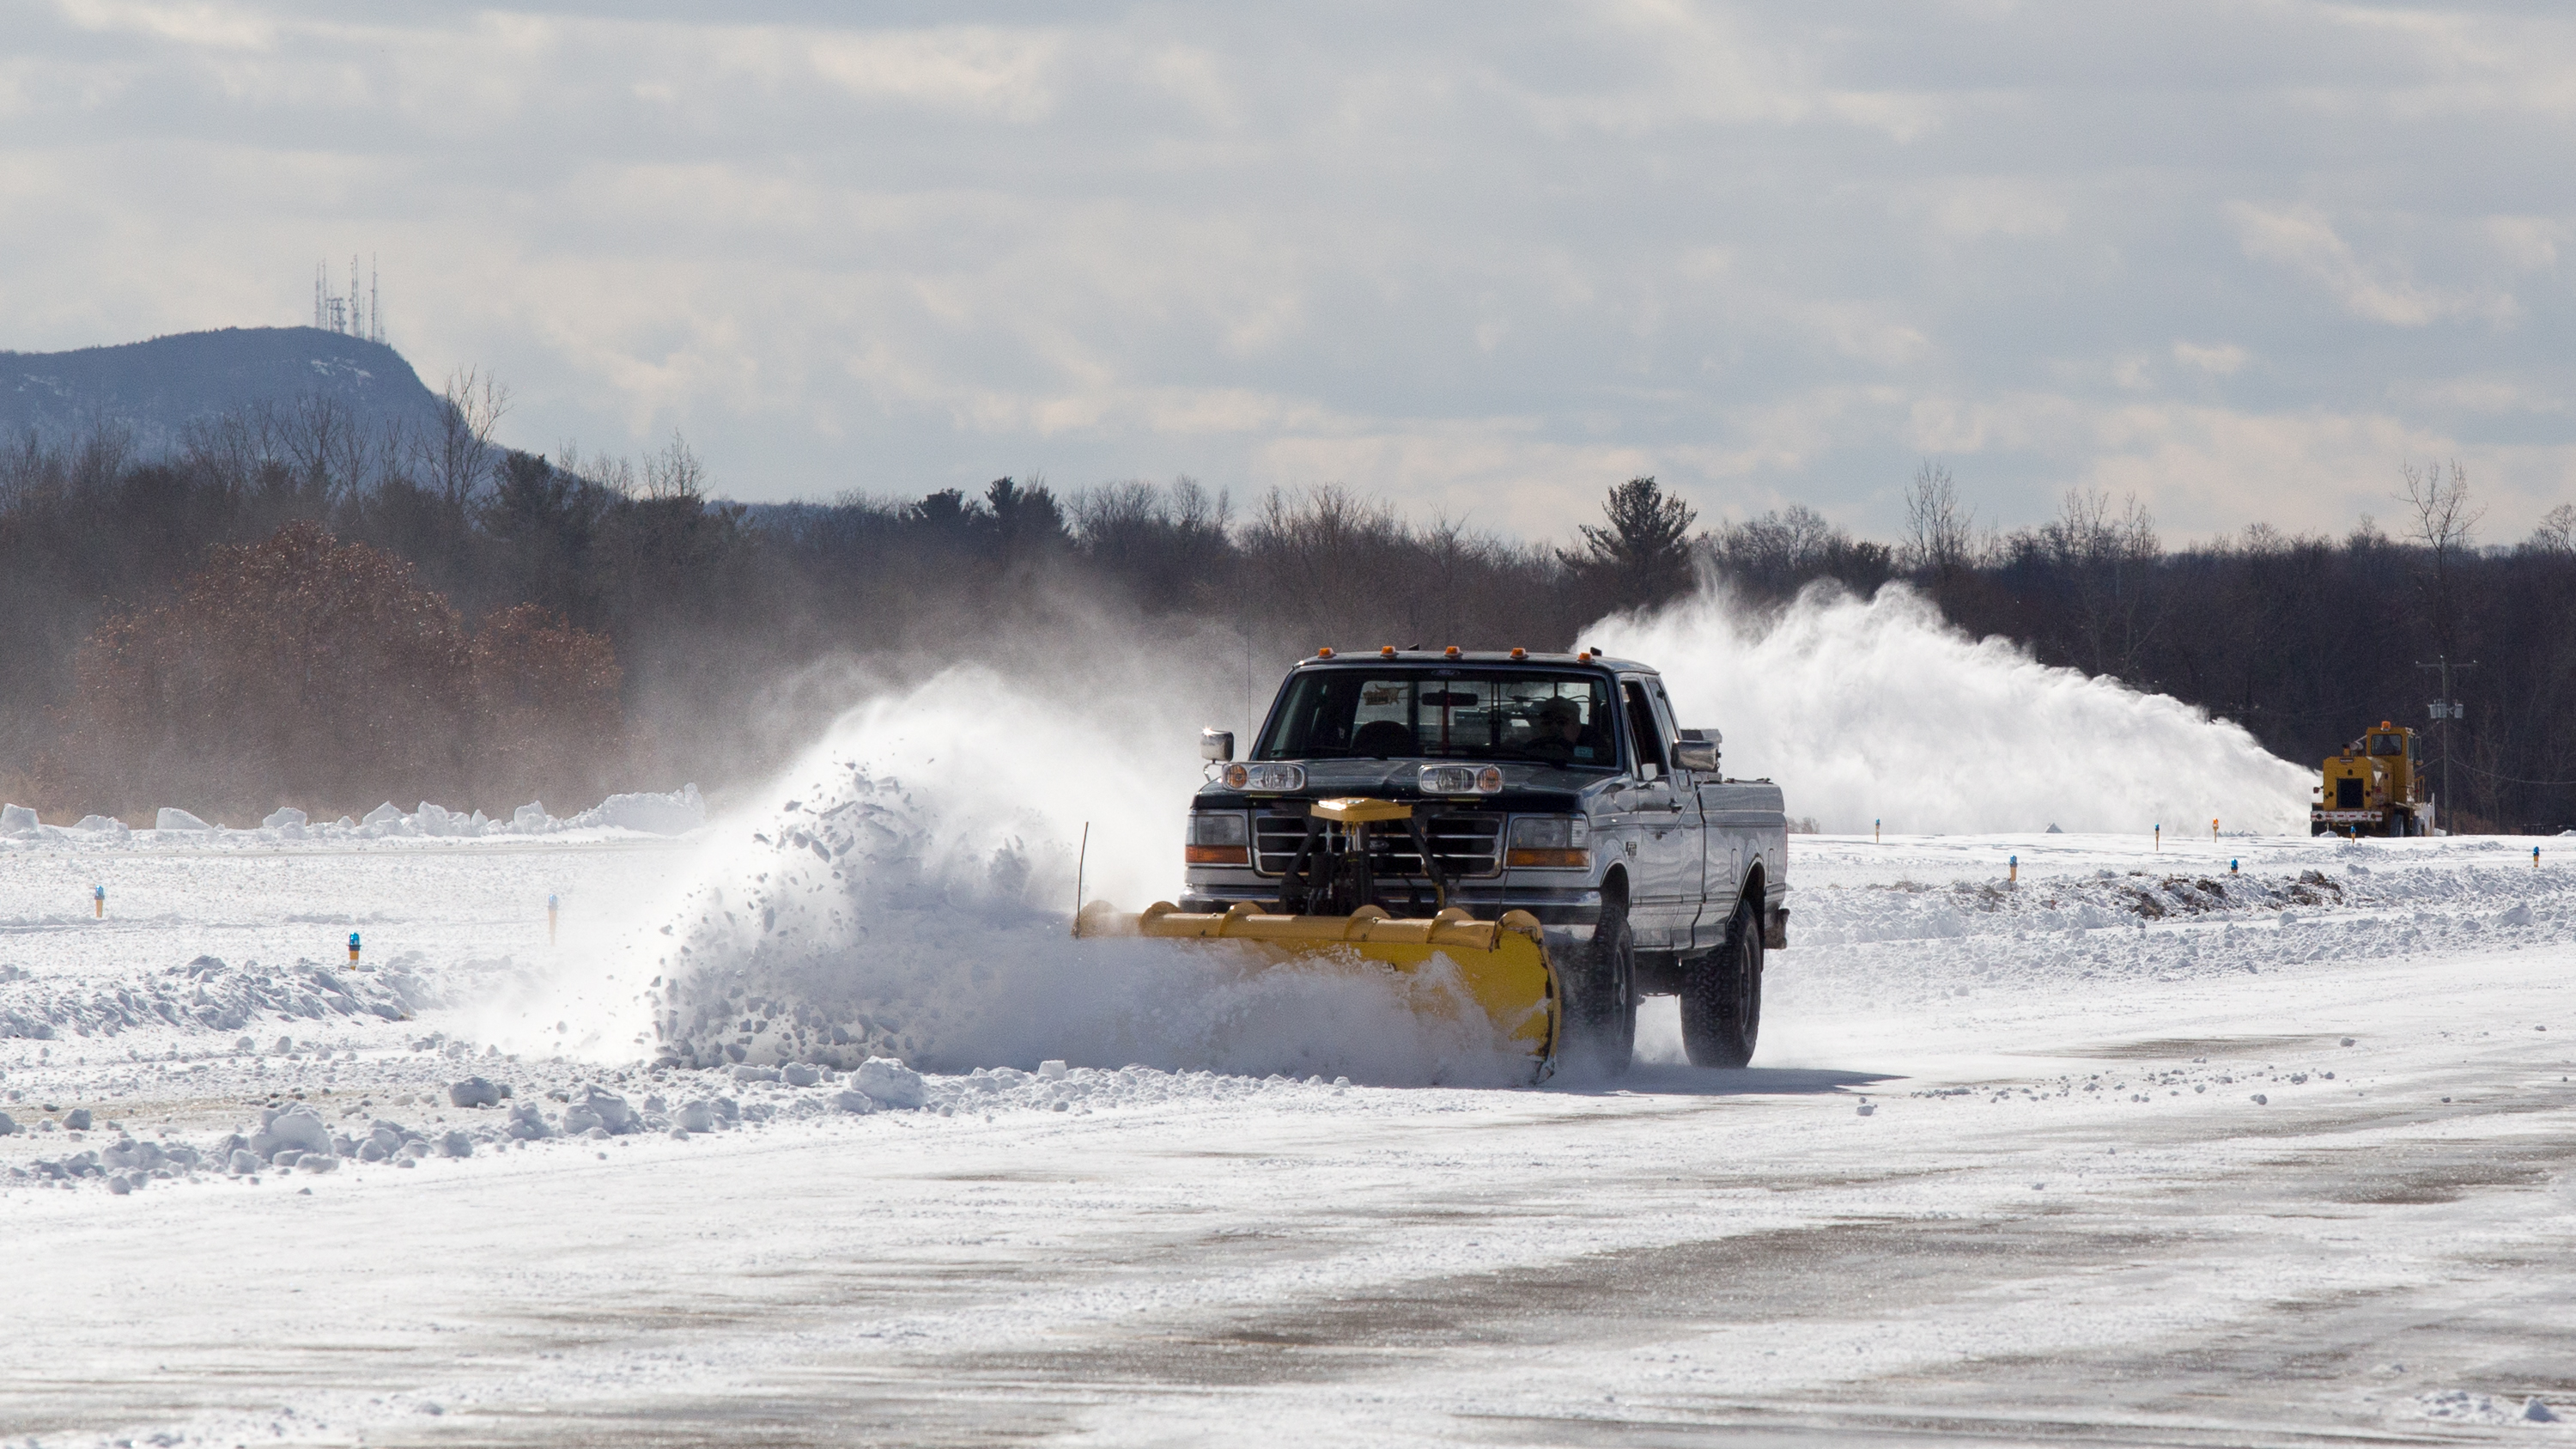 Airport manager Bill O'Leary plows with a pickup while one of his employees clears the runway with an SMI Snowmaster on Feb. 10. Jim Moore photo.